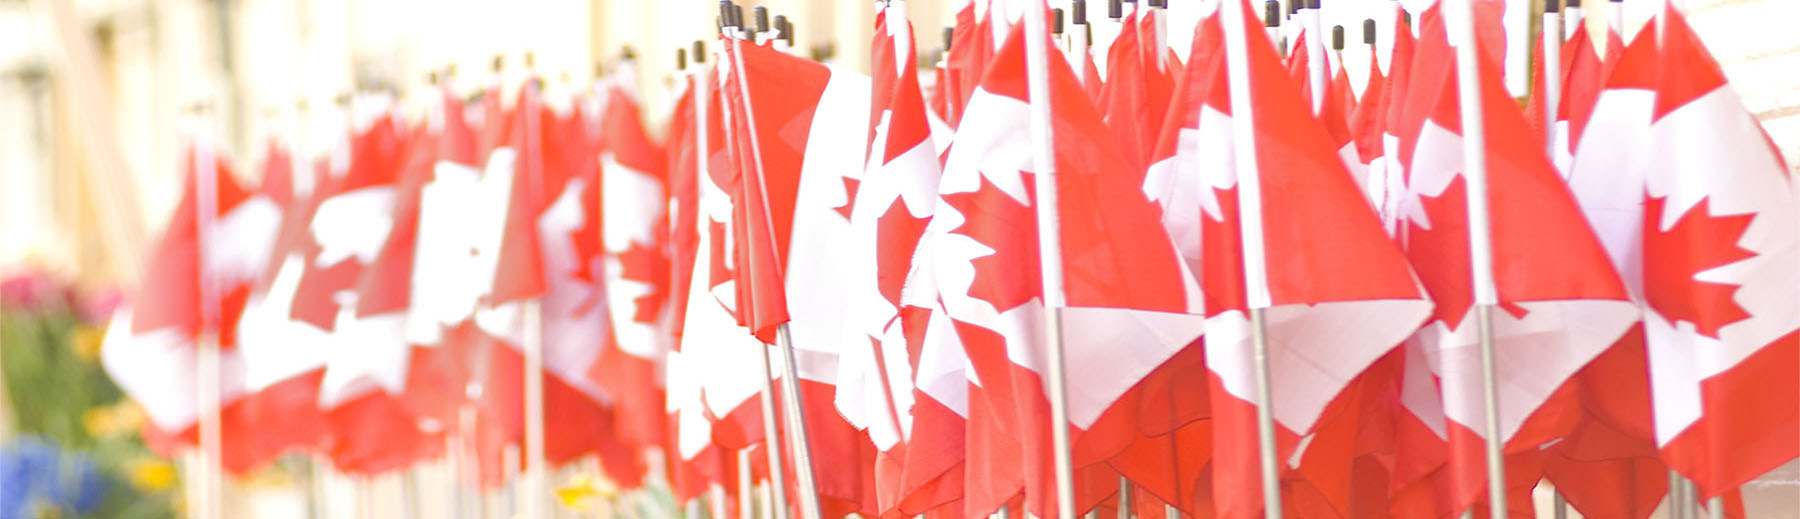 Canadian flags